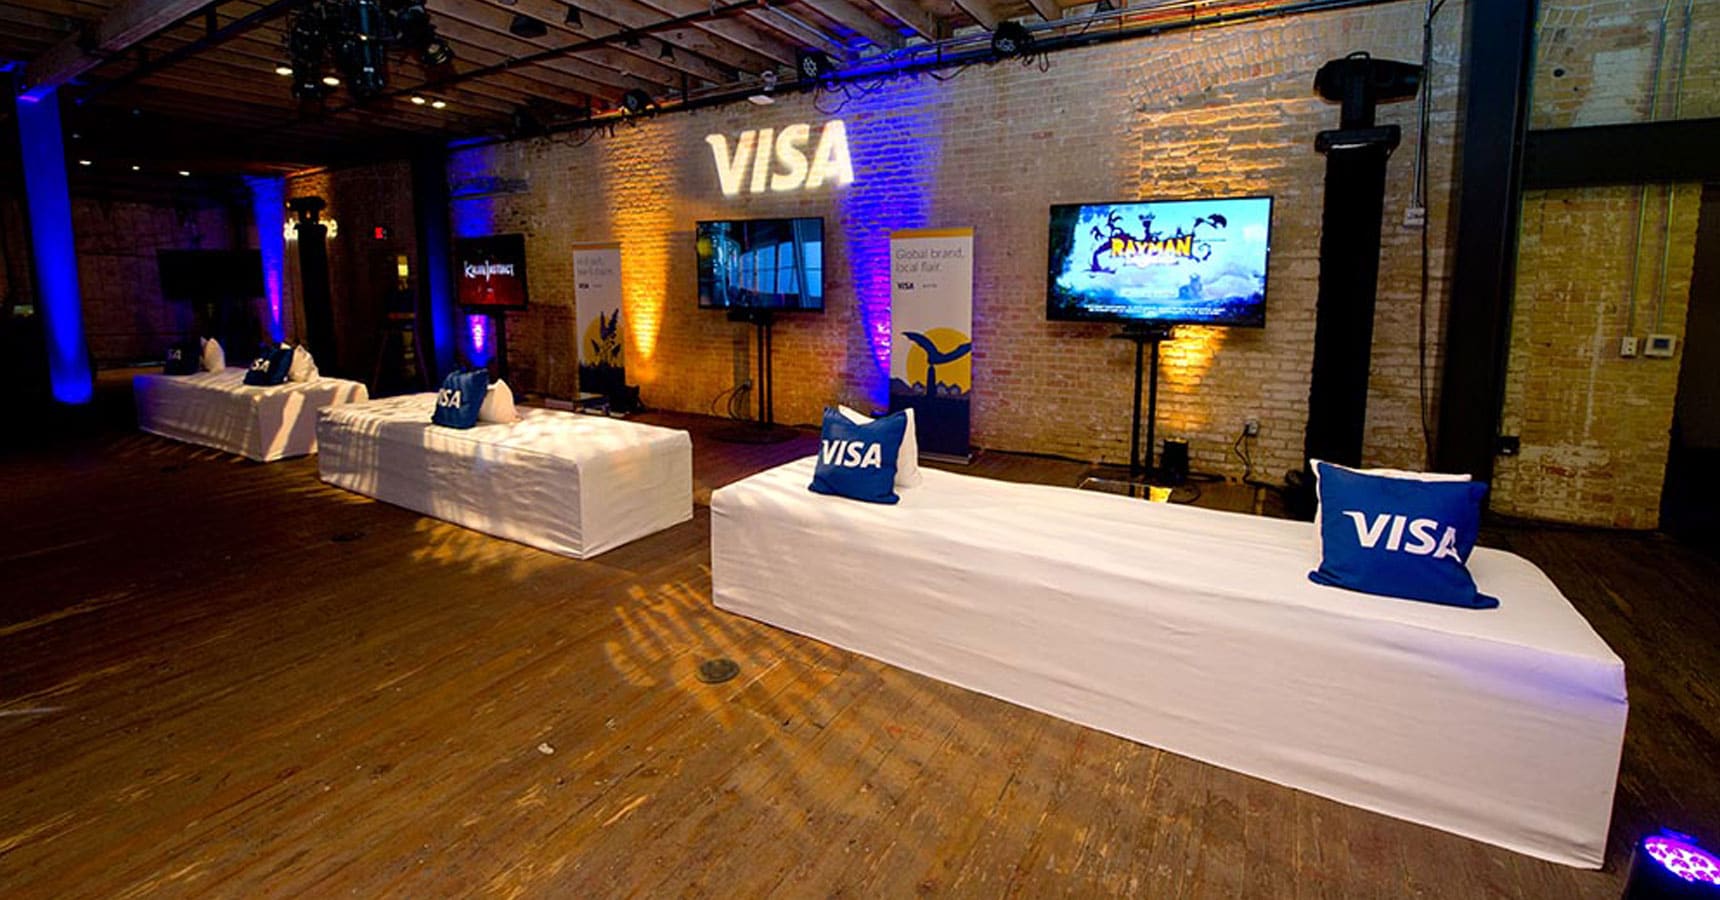 Visa event by Crave Catering